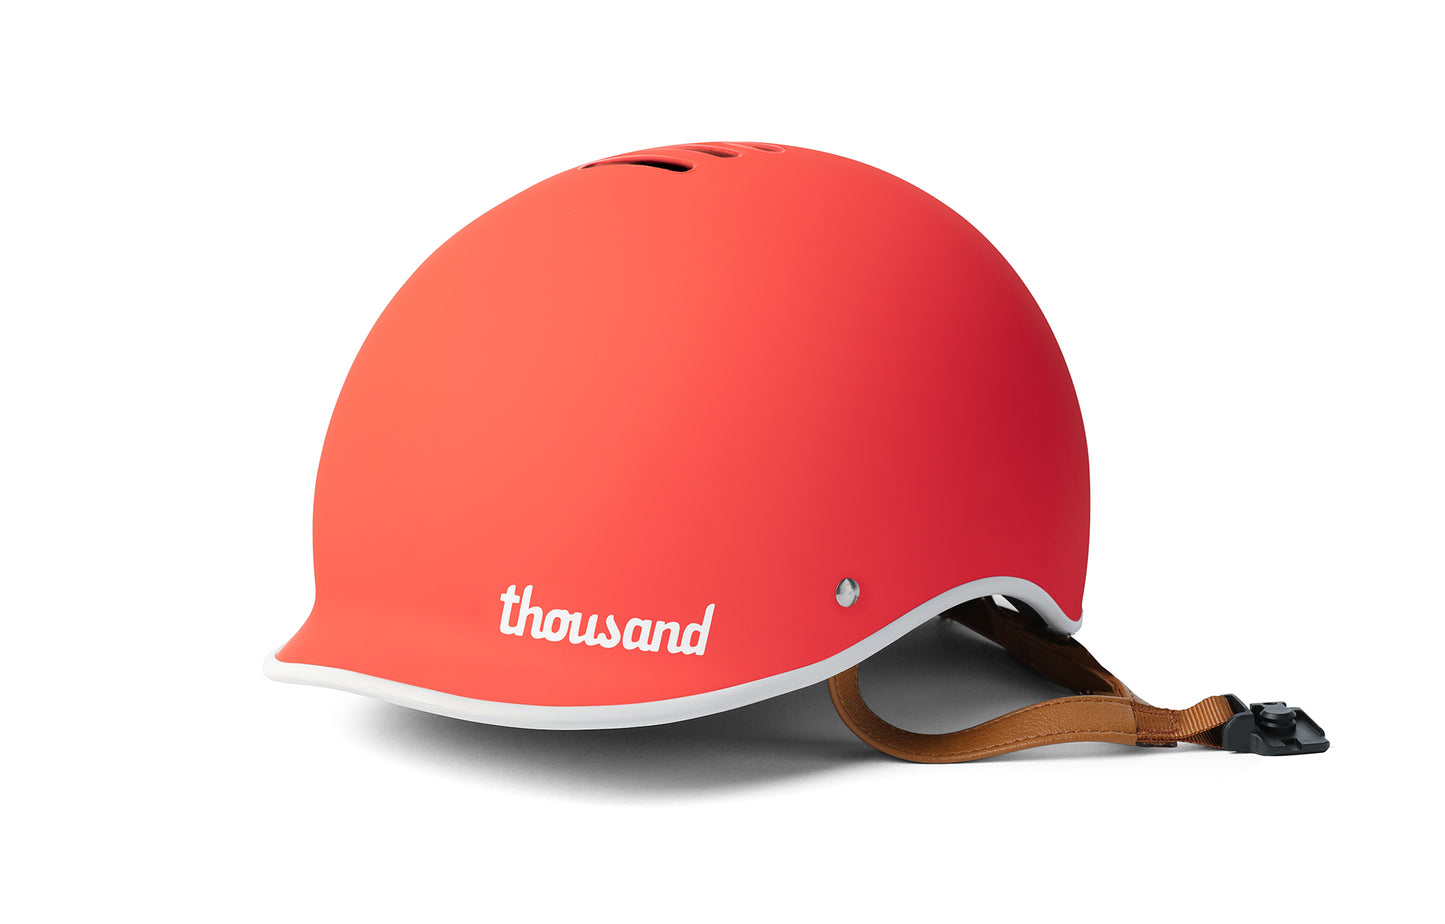 Thousand Helmet Heritage Collection - DAYBREAK RED